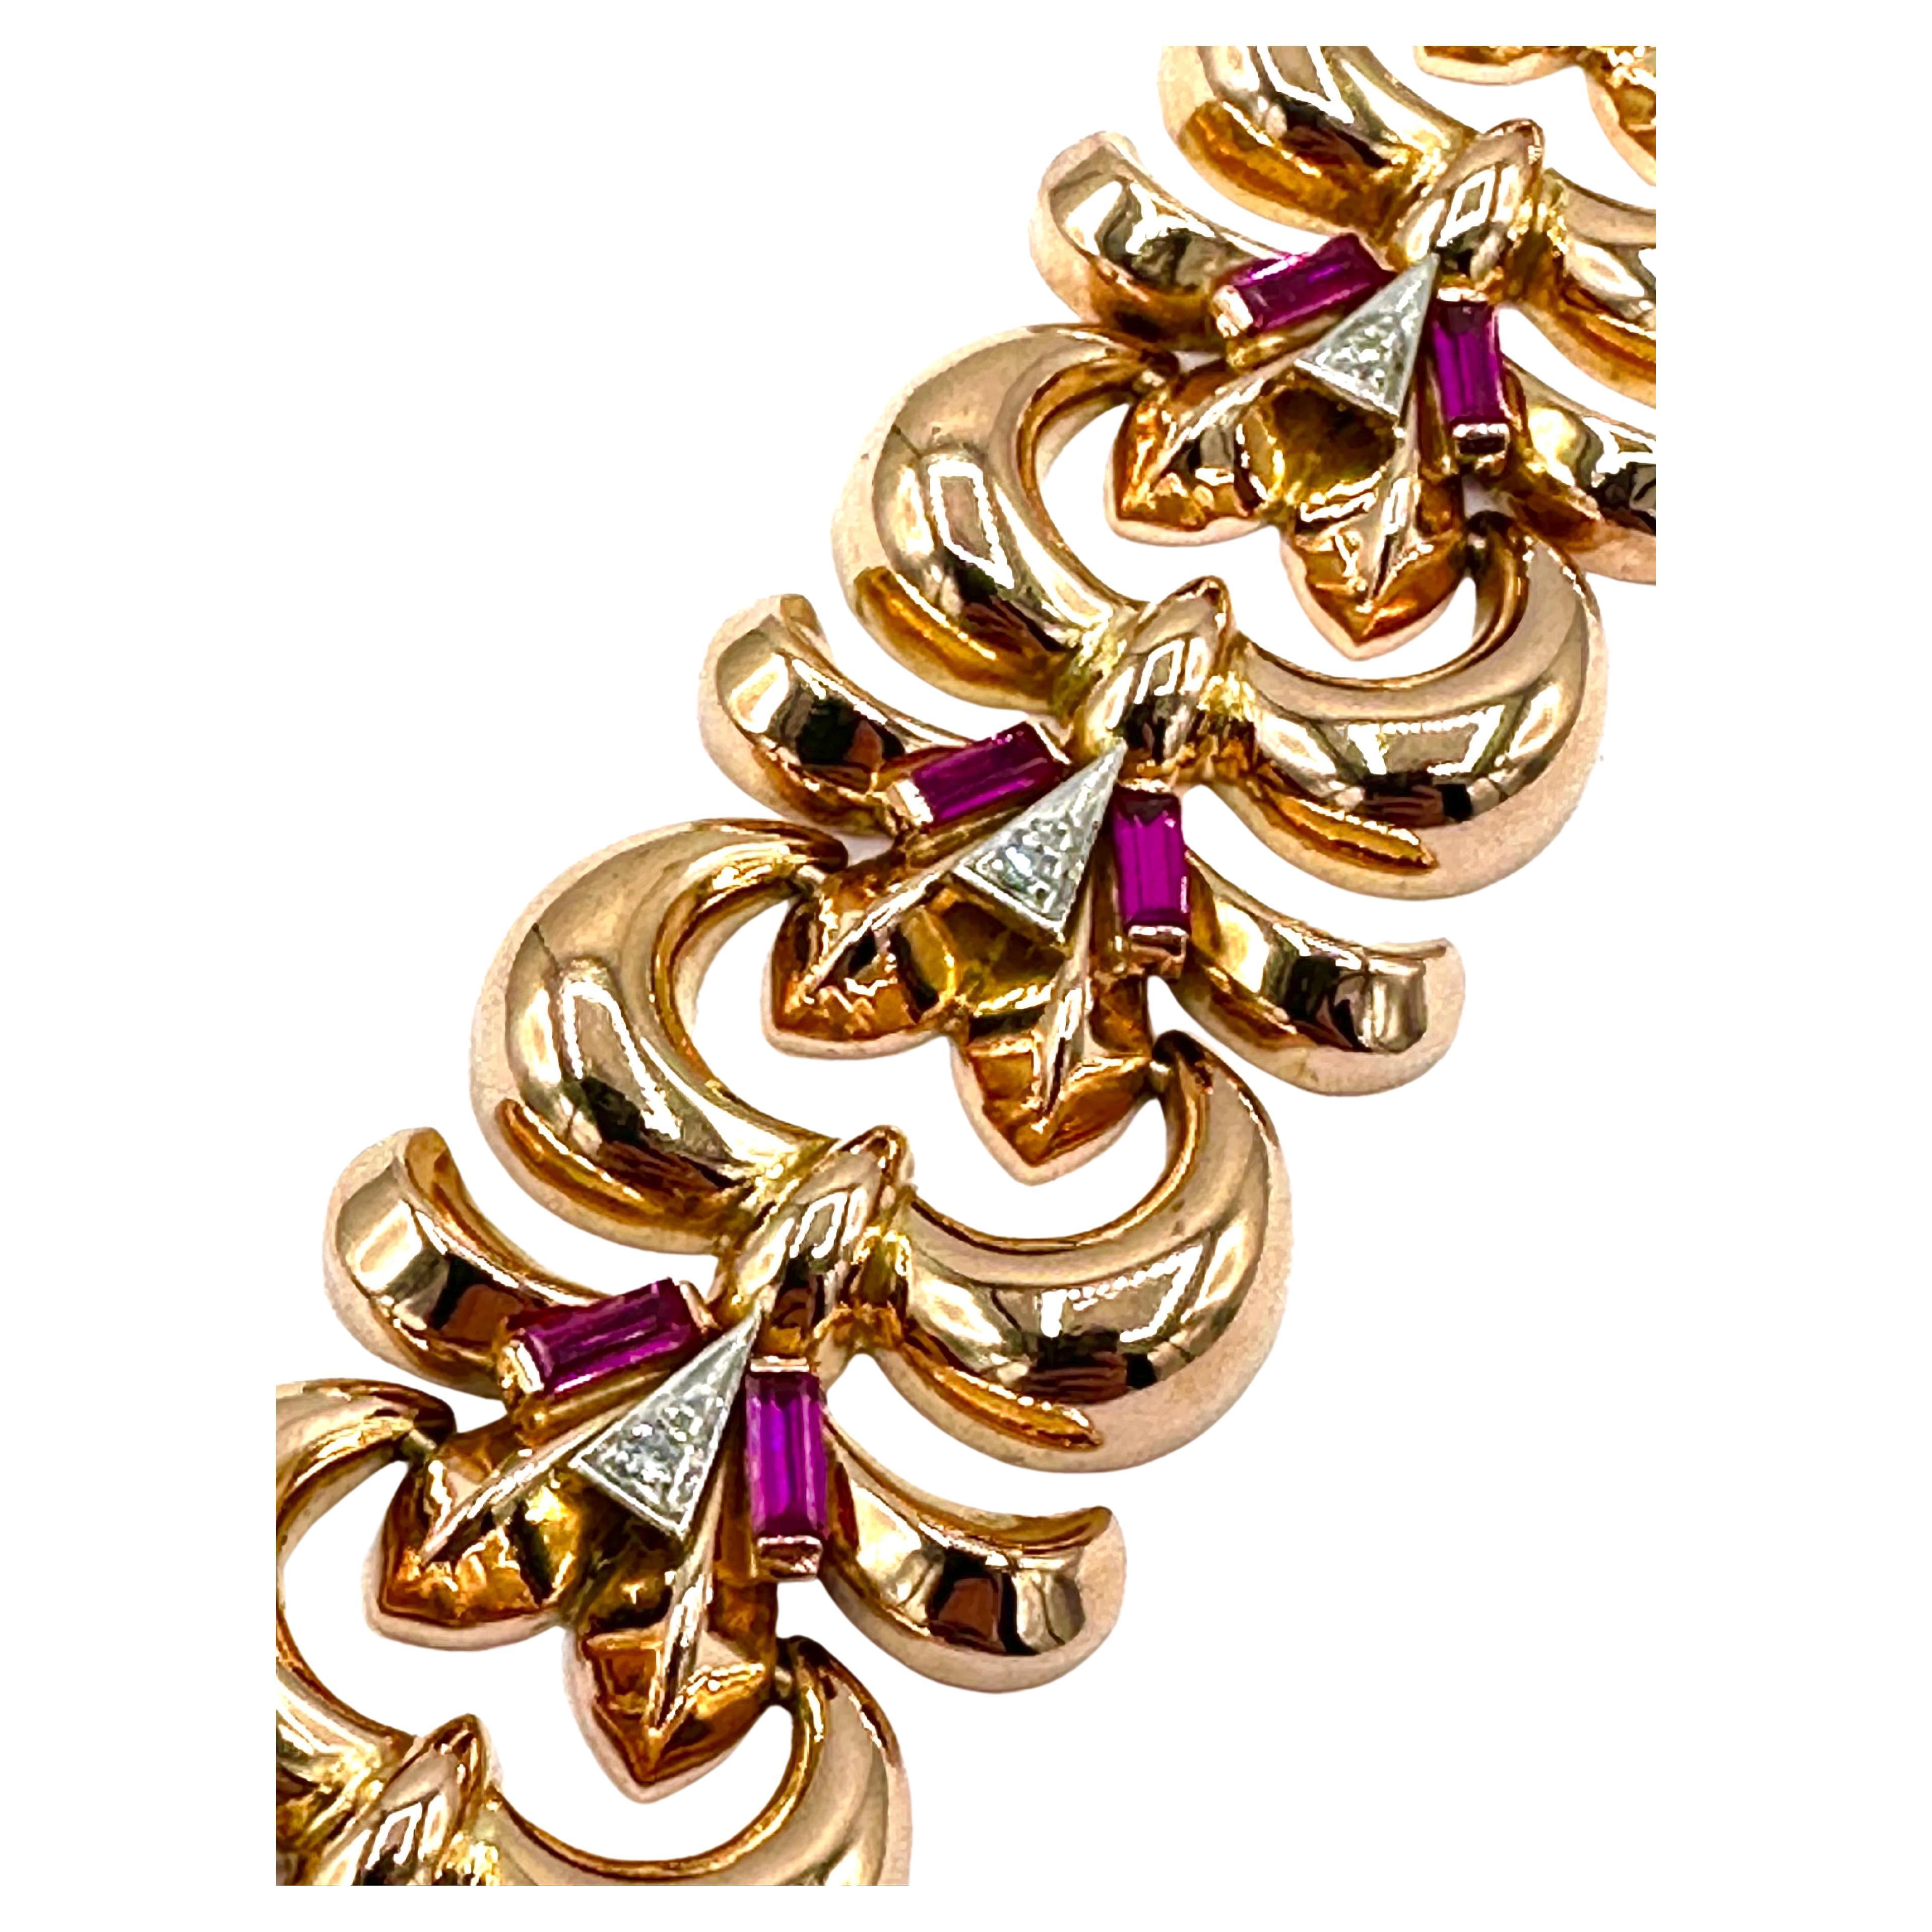 Diamond and Ruby 18k Rose Gold Bracelet with Hidden Box Clasp